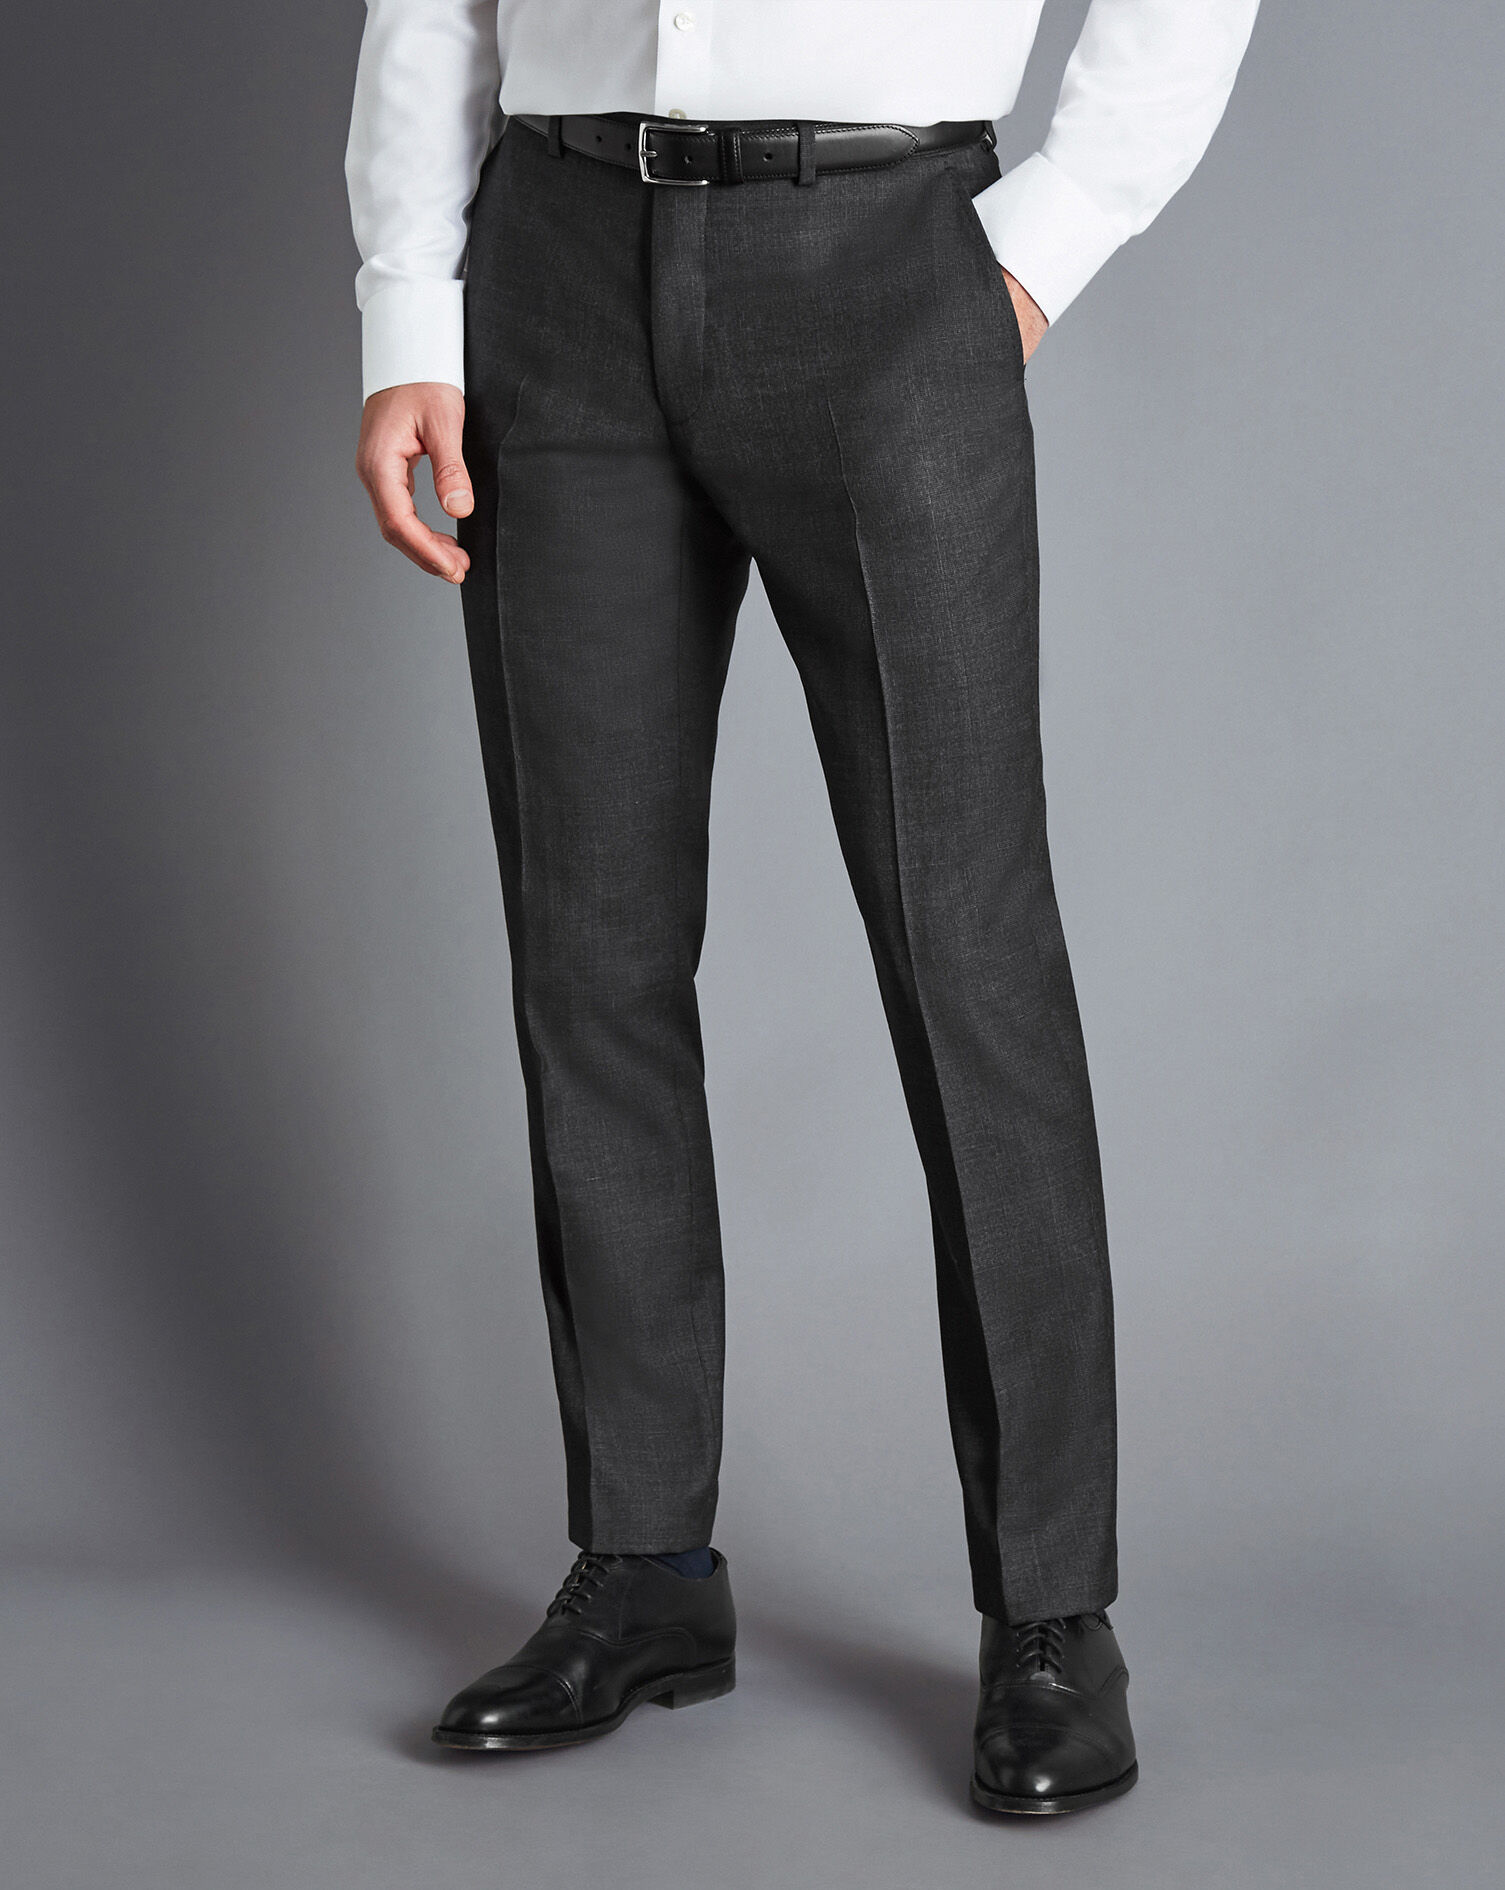 Occasions  Grey Tailor Fit Wedding Trousers  SuitDirectcouk